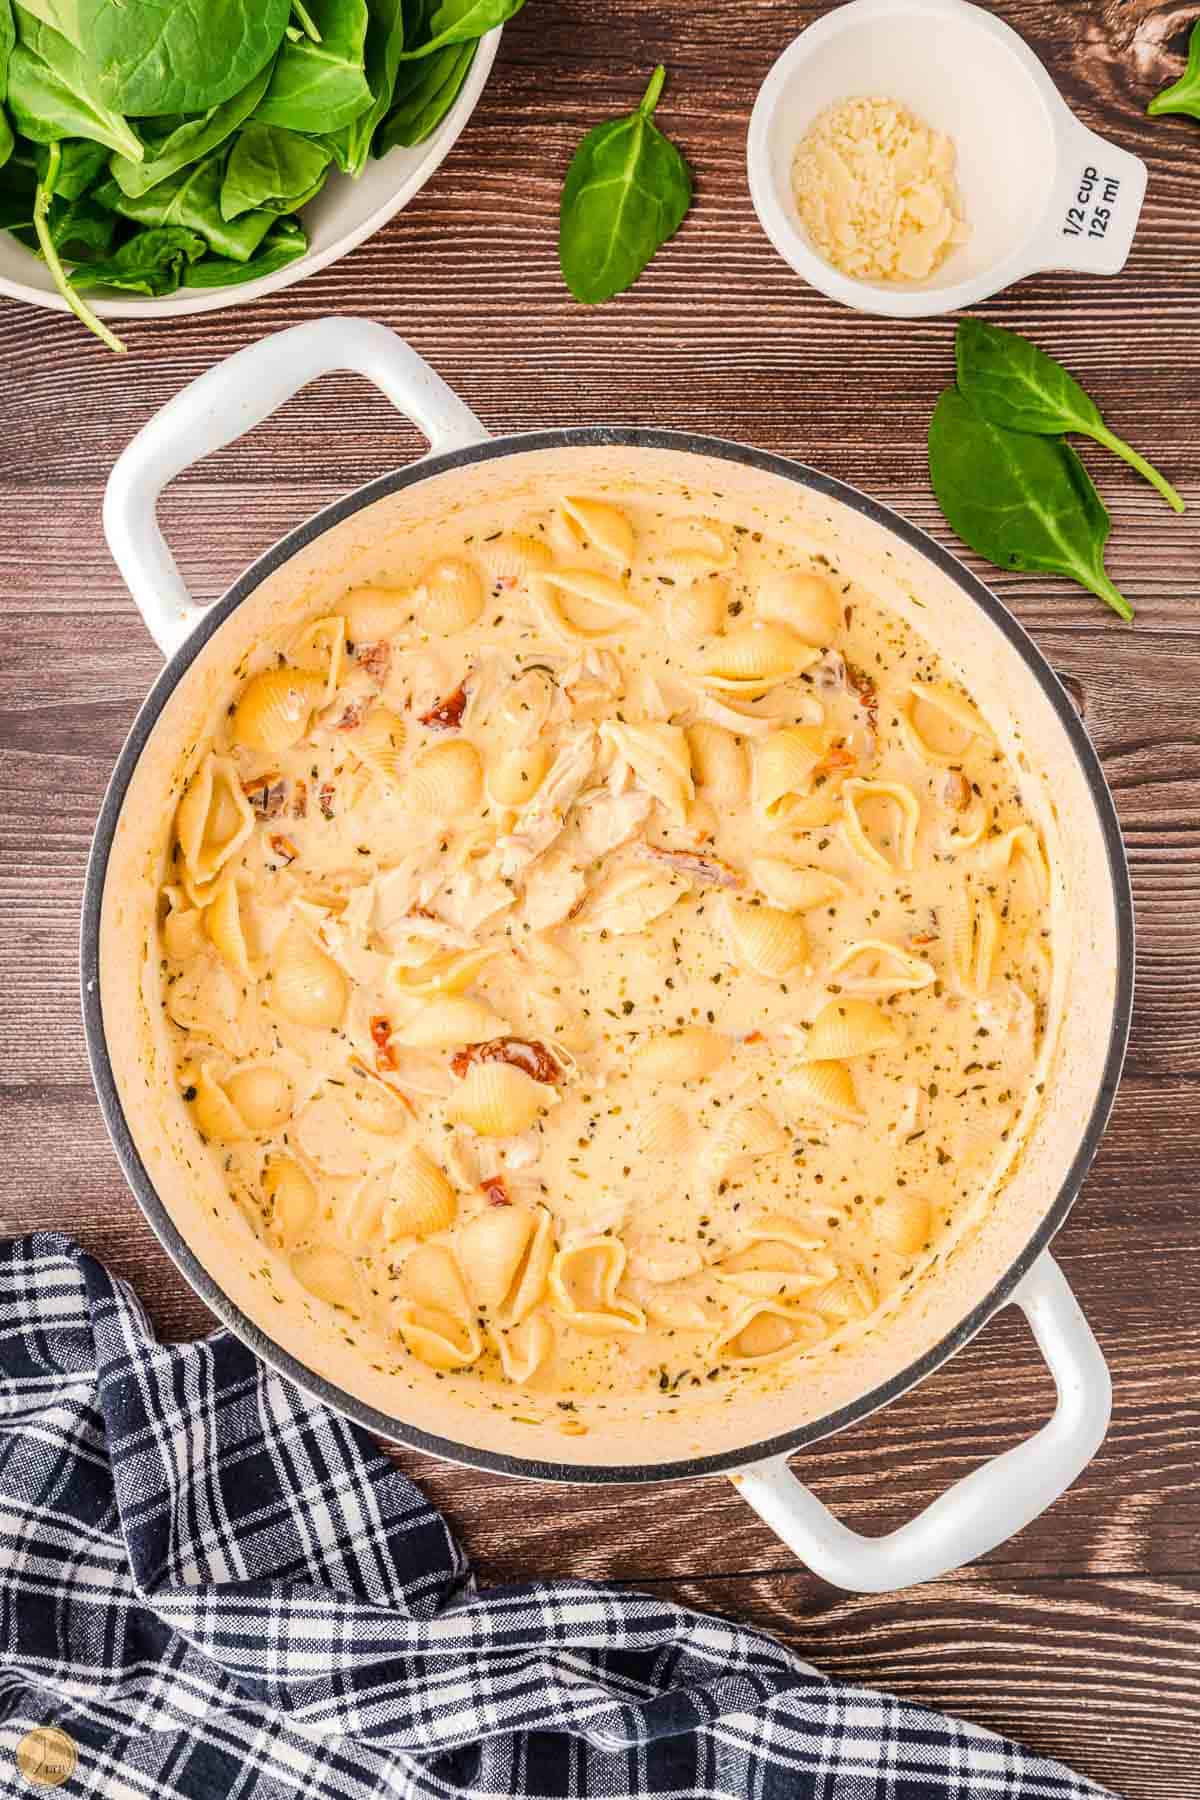 tender pasta shells in a creamy sauce